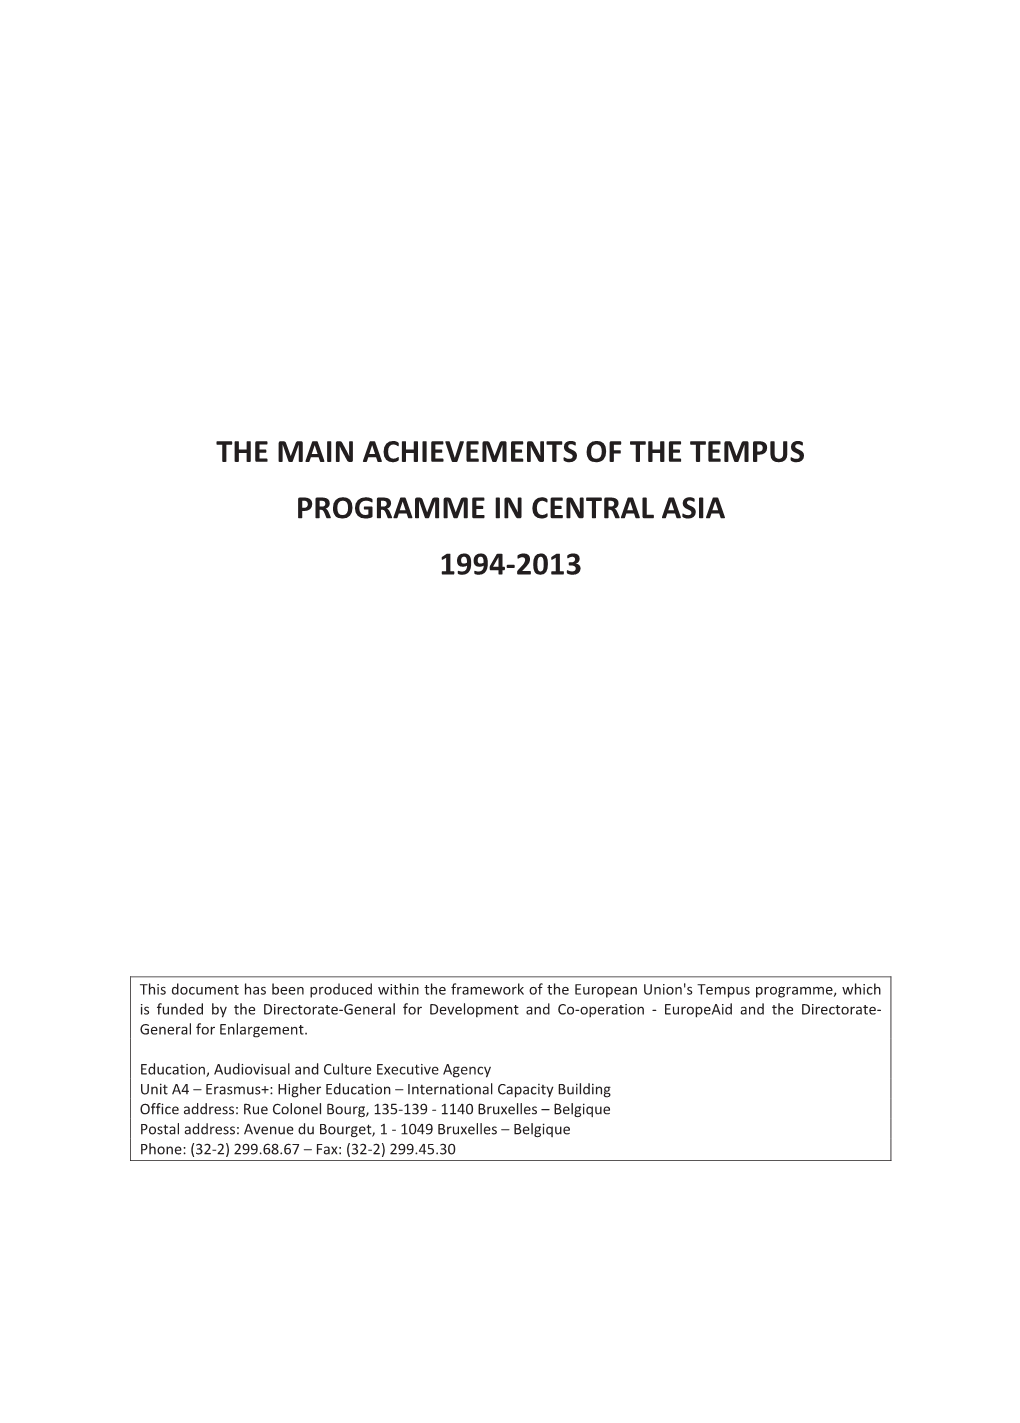 The Main Achievements of the Tempus Programme in Central Asia 1994‐2013